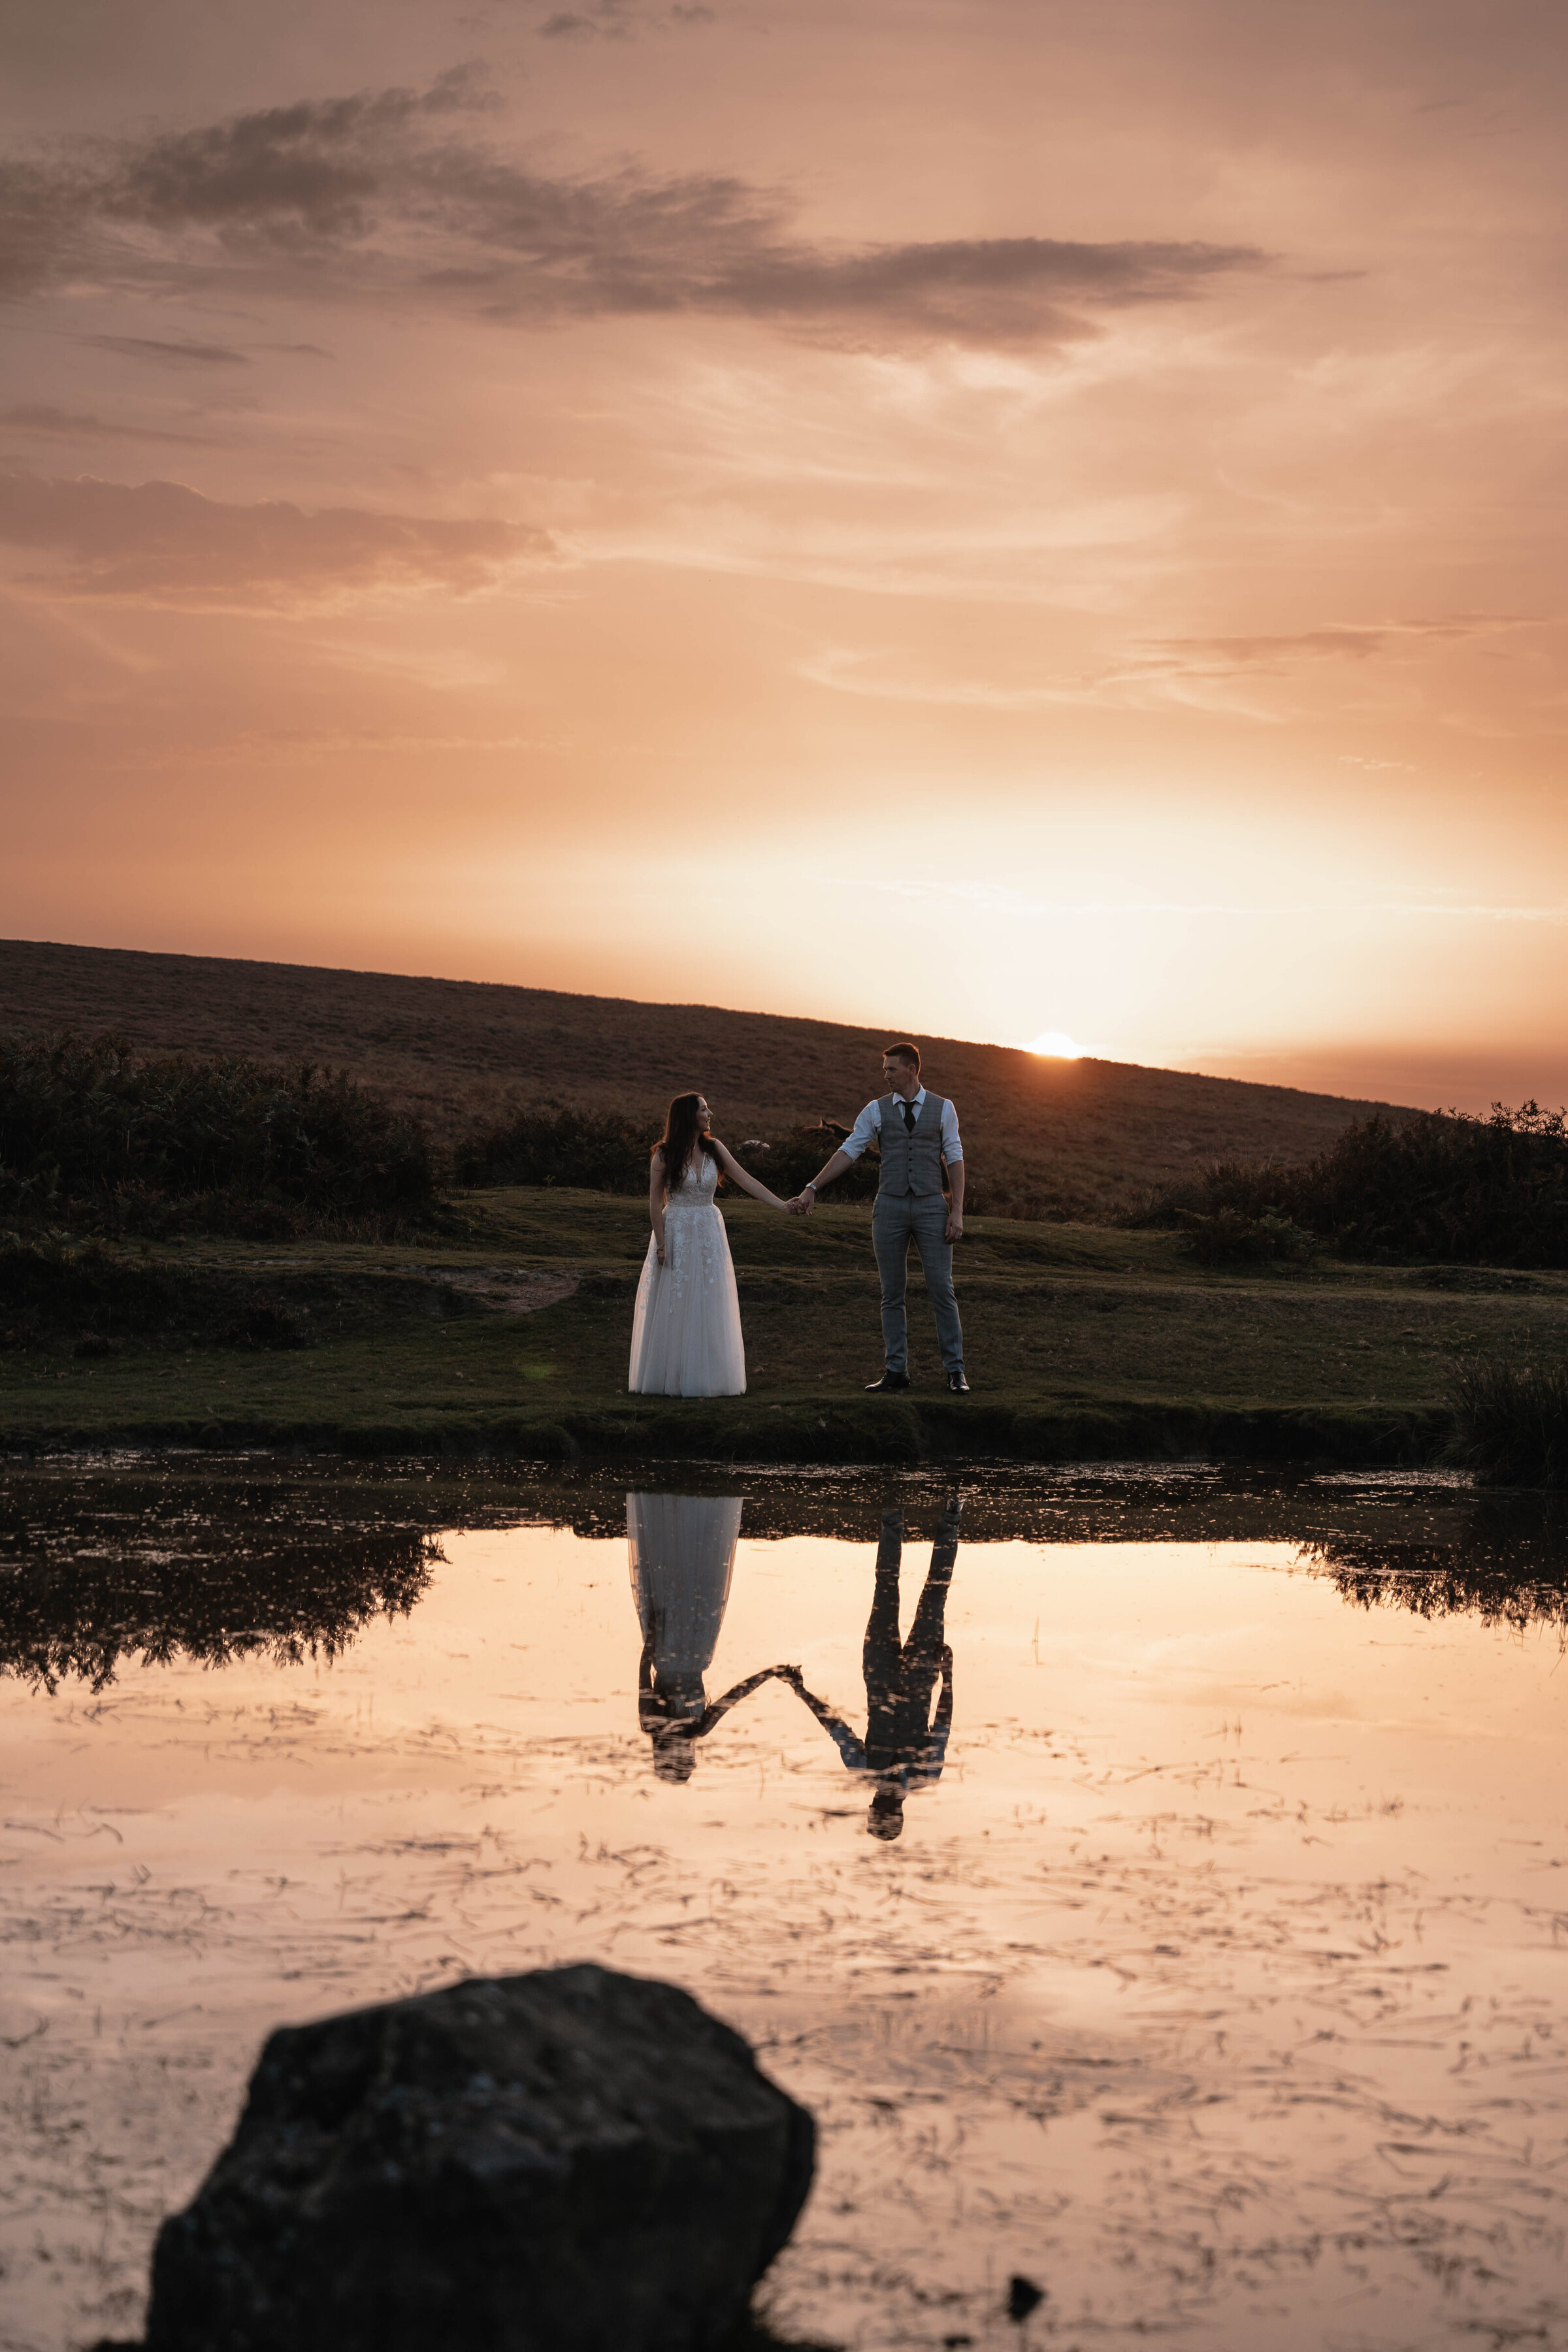 Bride and Groom in wedding attire holding hands in front of pond with golden sunset in the background